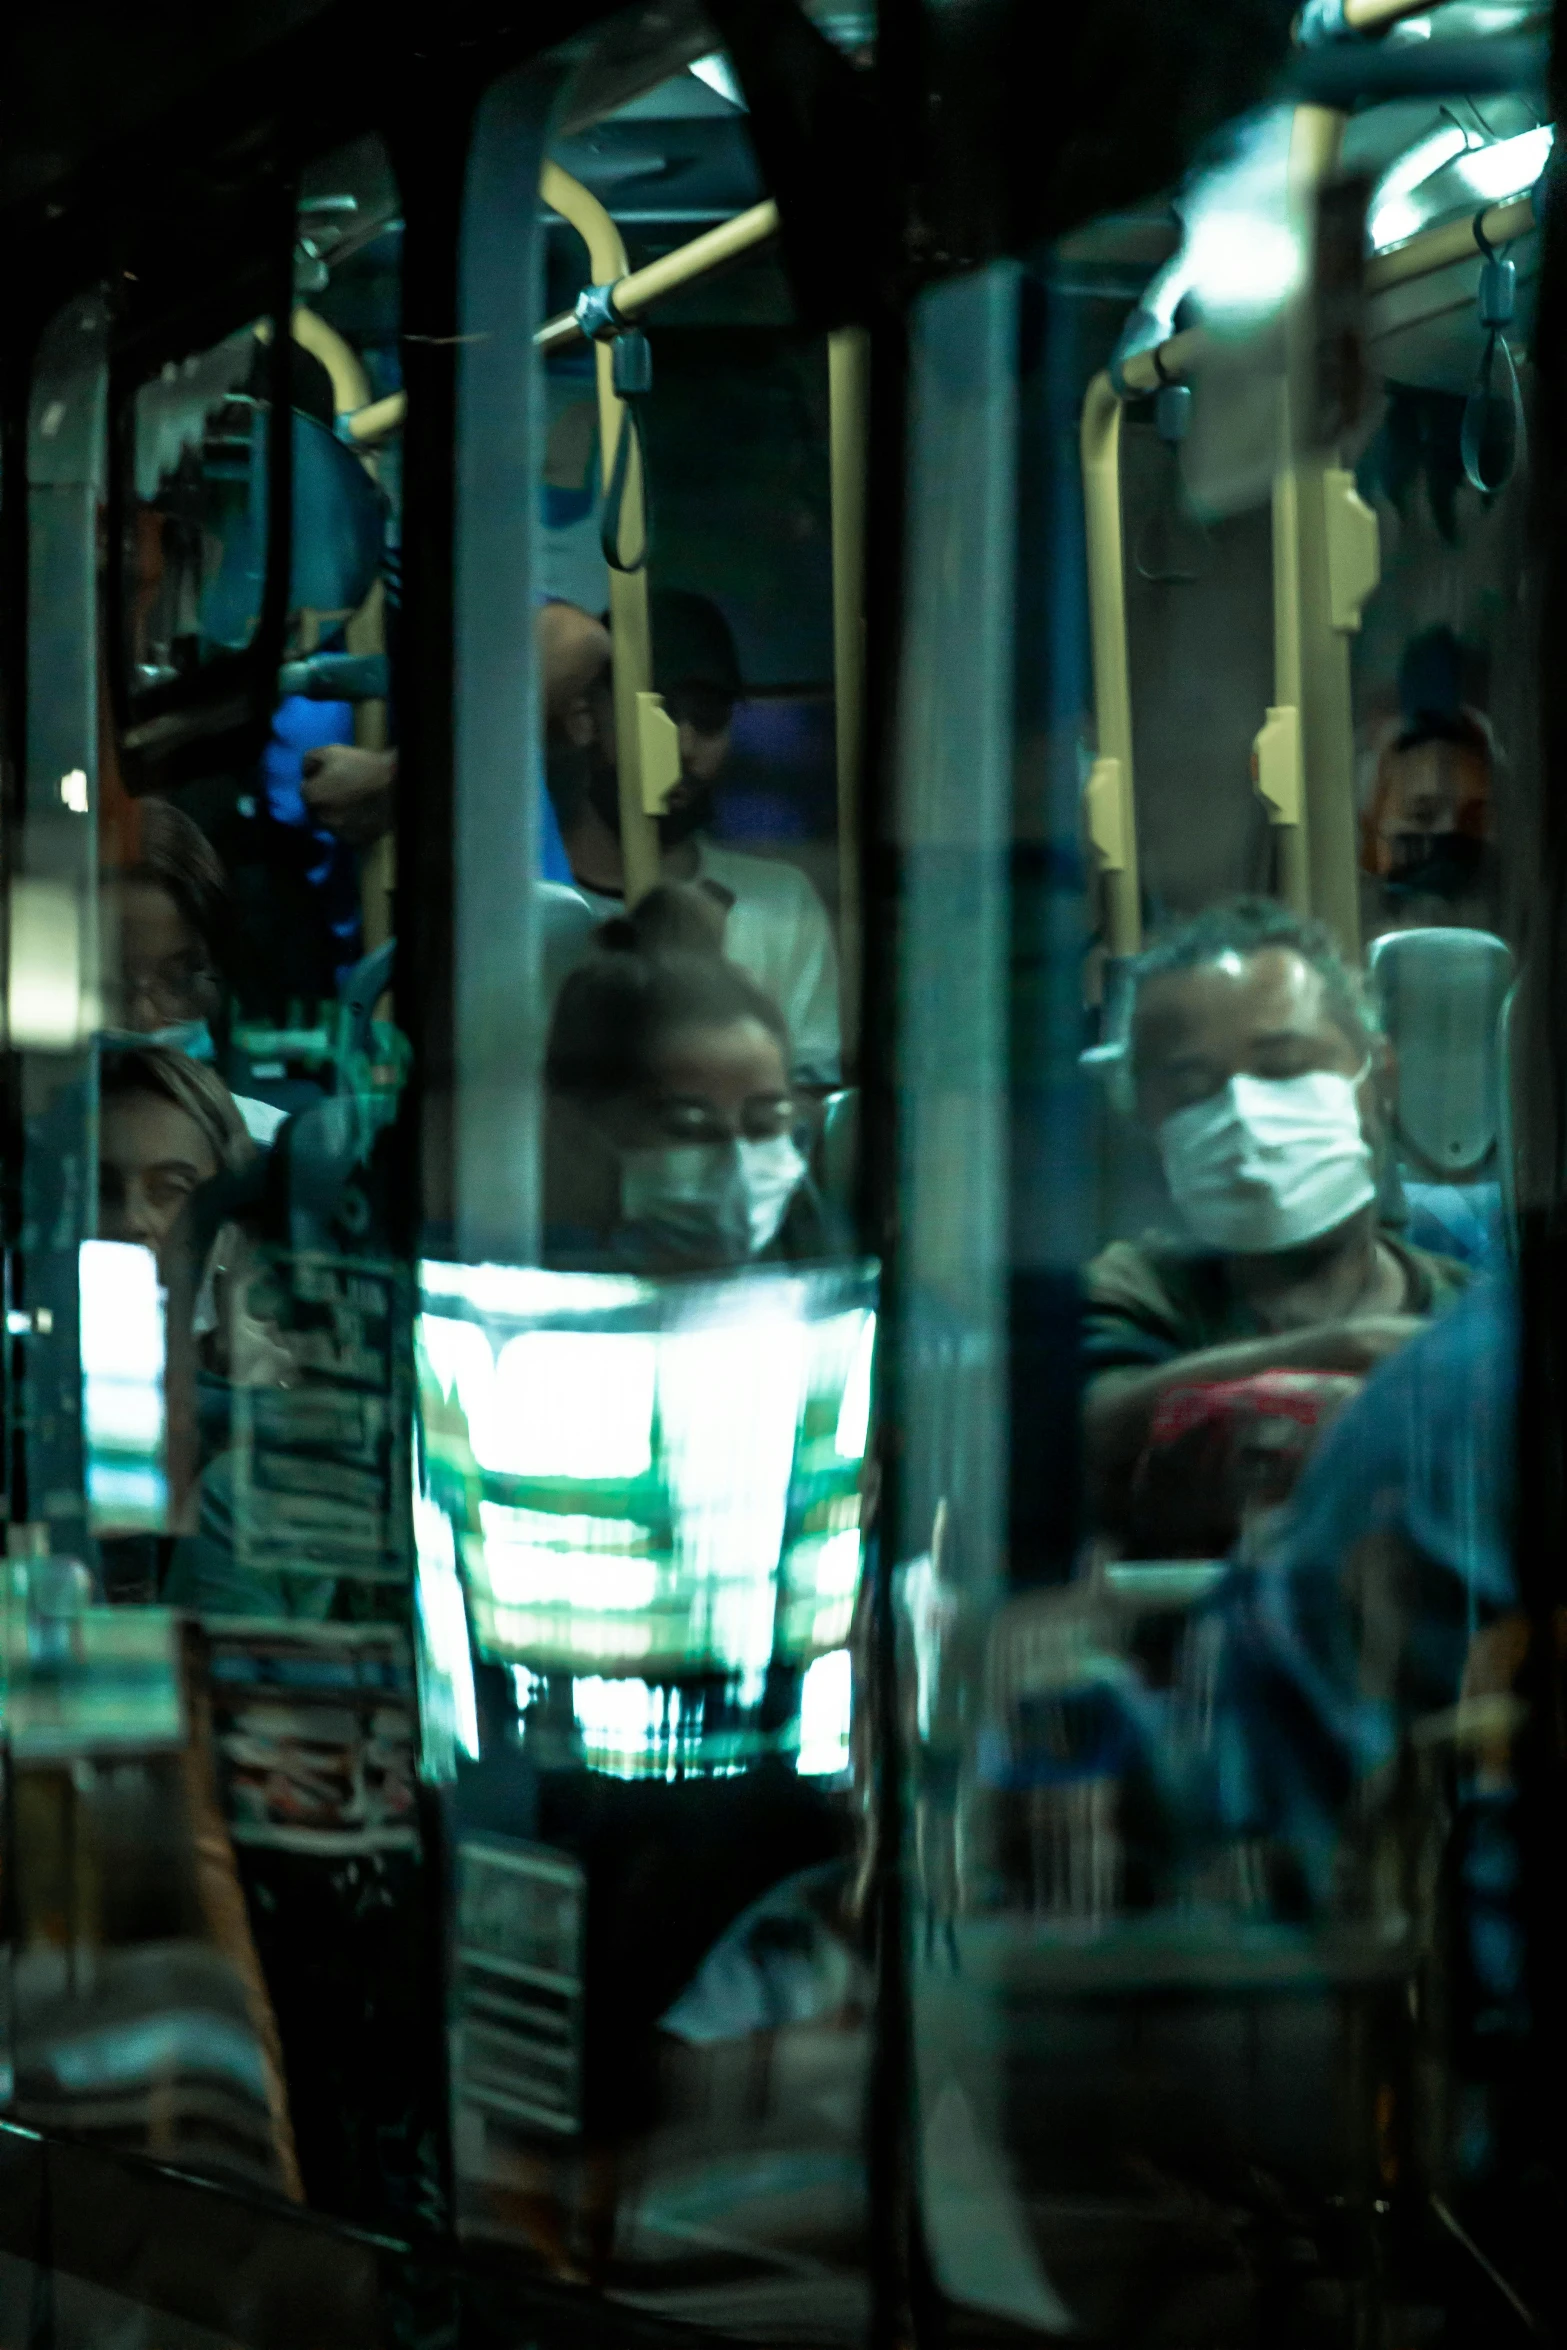 many people are seated on public transit buses